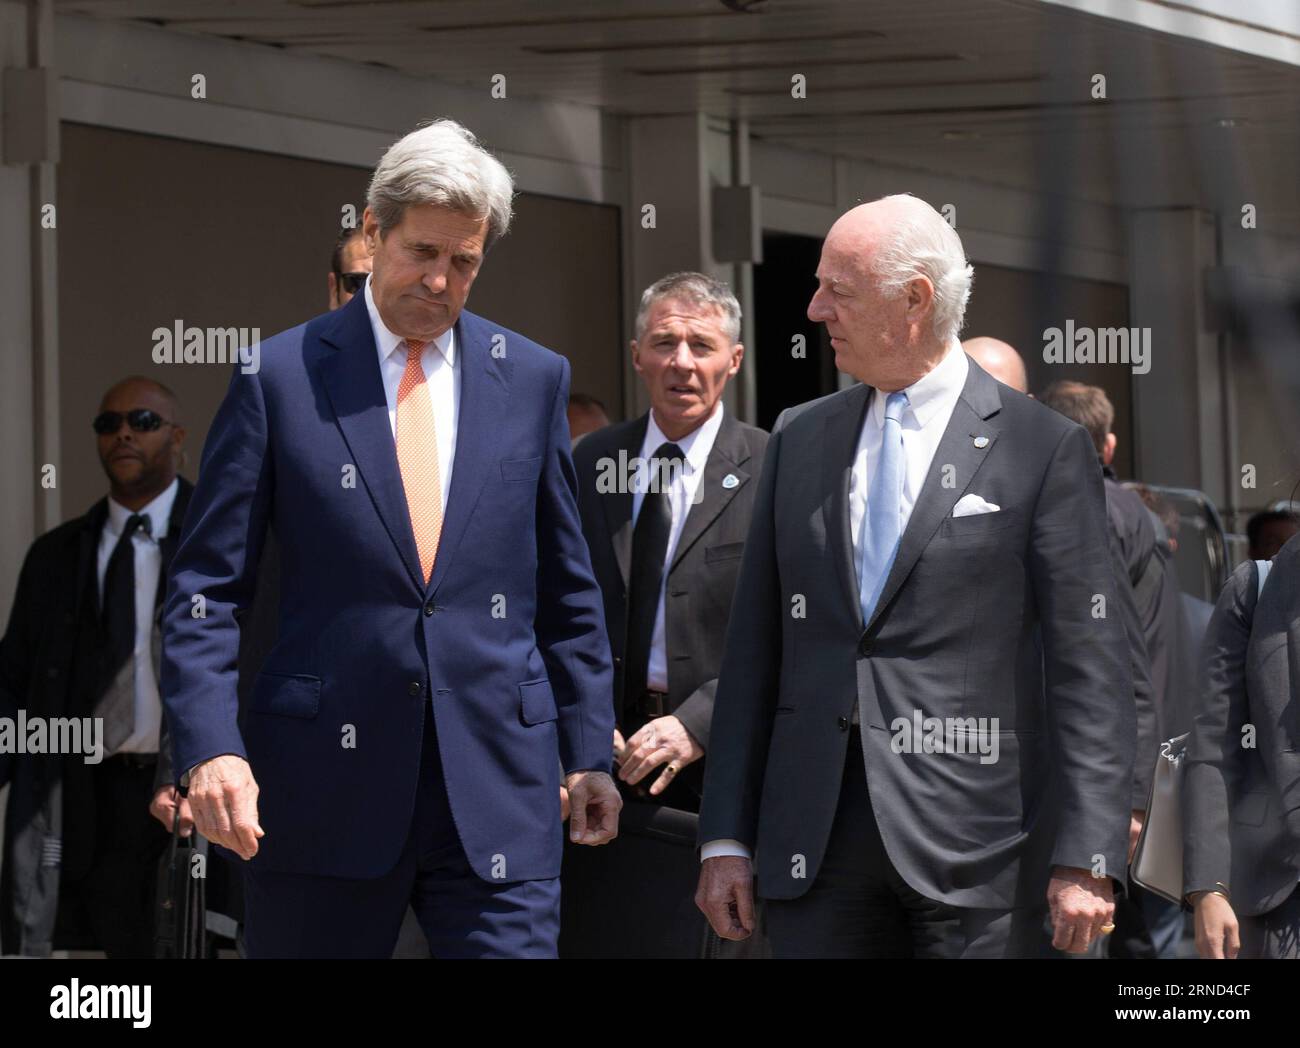 (160502) -- GENEVA, May 2, 2016 -- U.S. Secretary of State John Kerry (L, front) and UN Special Envoy for Syria Staffan de Mistura (R, front) arrive for a press conference after their meeting in a hotel in Geneva, Switzerland, May 2, 2016. U.S. Secretary of State John Kerry on Monday urged all parties to the Syrian conflict to end violence and restore the cessation of hostilities during his second day trip here for talks focusing on the Syrian situation. ) SWITZERLAND-GENEVA-SYRIAN CONFLICT-US-KERRY XuxJinquan PUBLICATIONxNOTxINxCHN   160502 Geneva May 2 2016 U S Secretary of State John Kerry Stock Photo